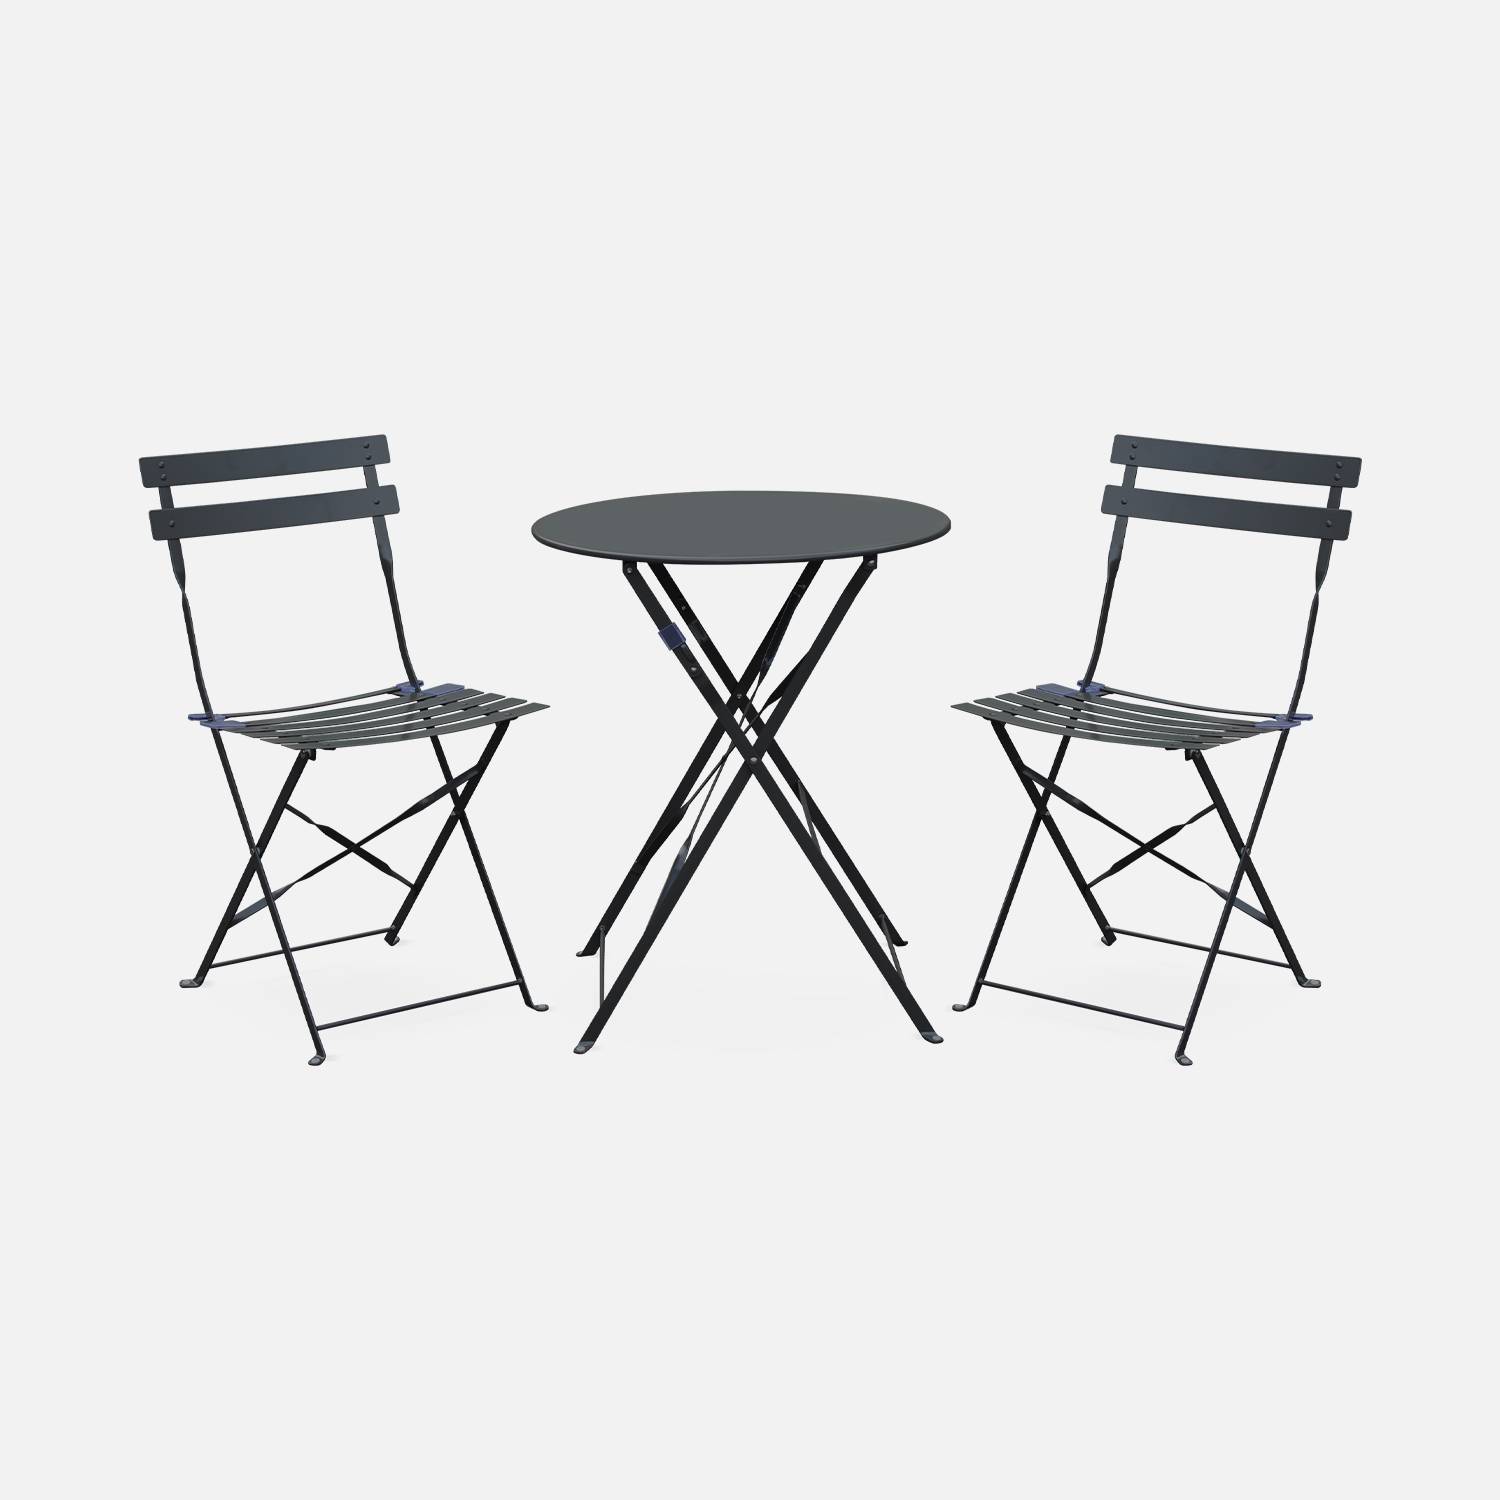 2-seater foldable thermo-lacquered steel bistro garden table with chairs, Ø60cm, Anthracite | sweeek